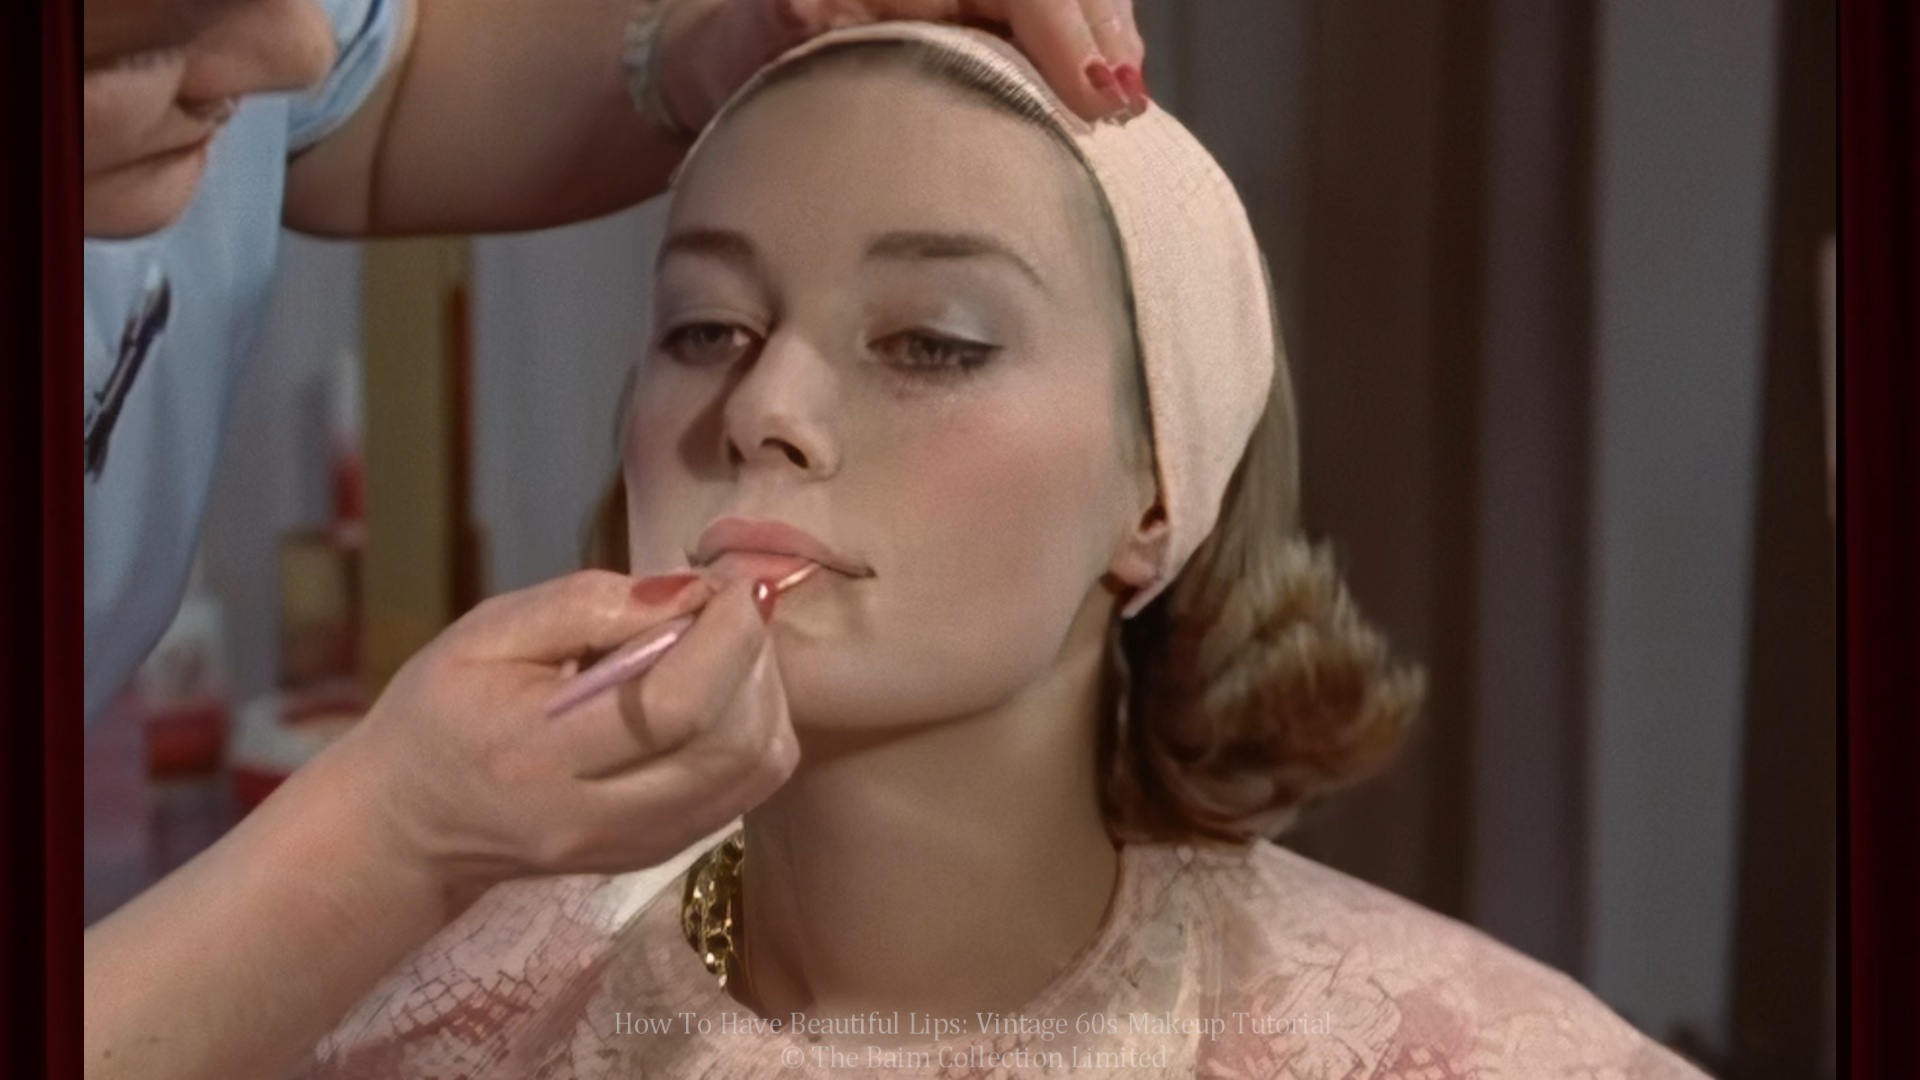 how to apply lipstick using a brush or wand in 1960